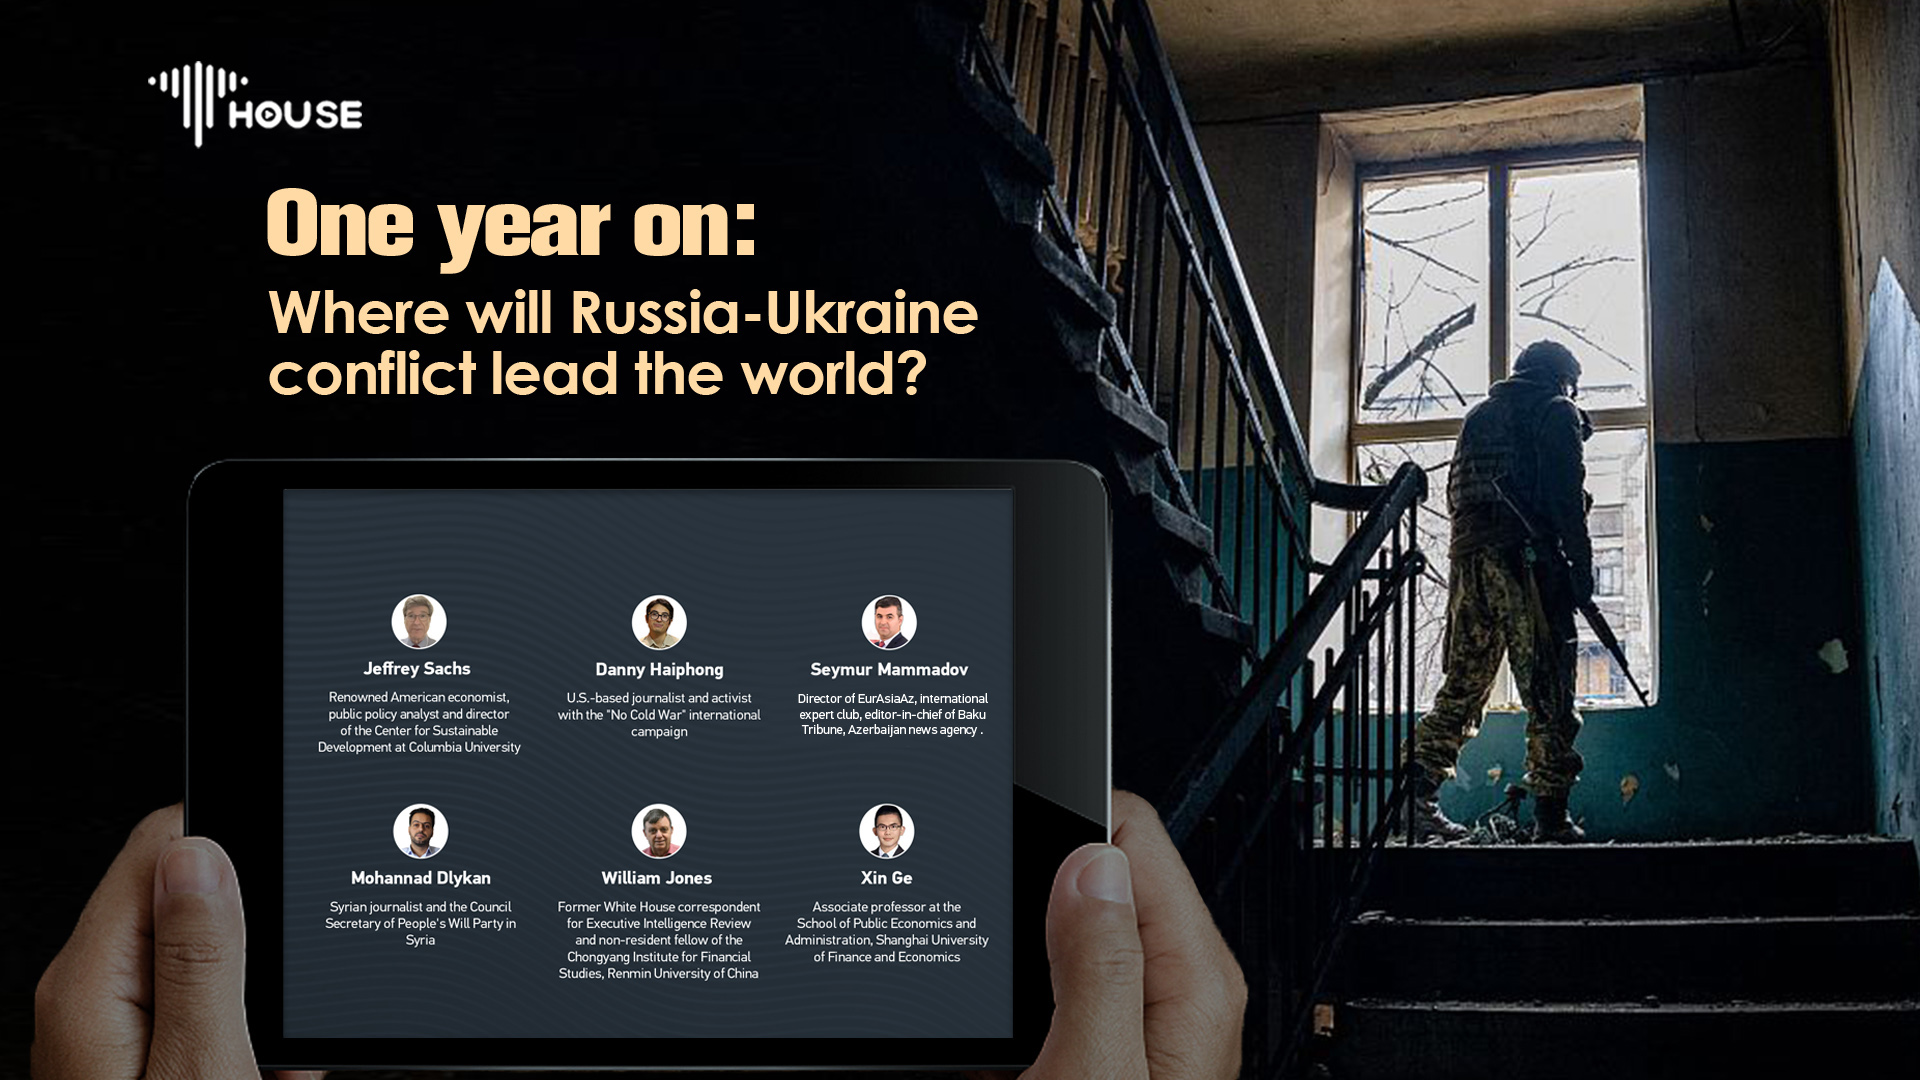 One year on: Where will Russia-Ukraine conflict lead the world?